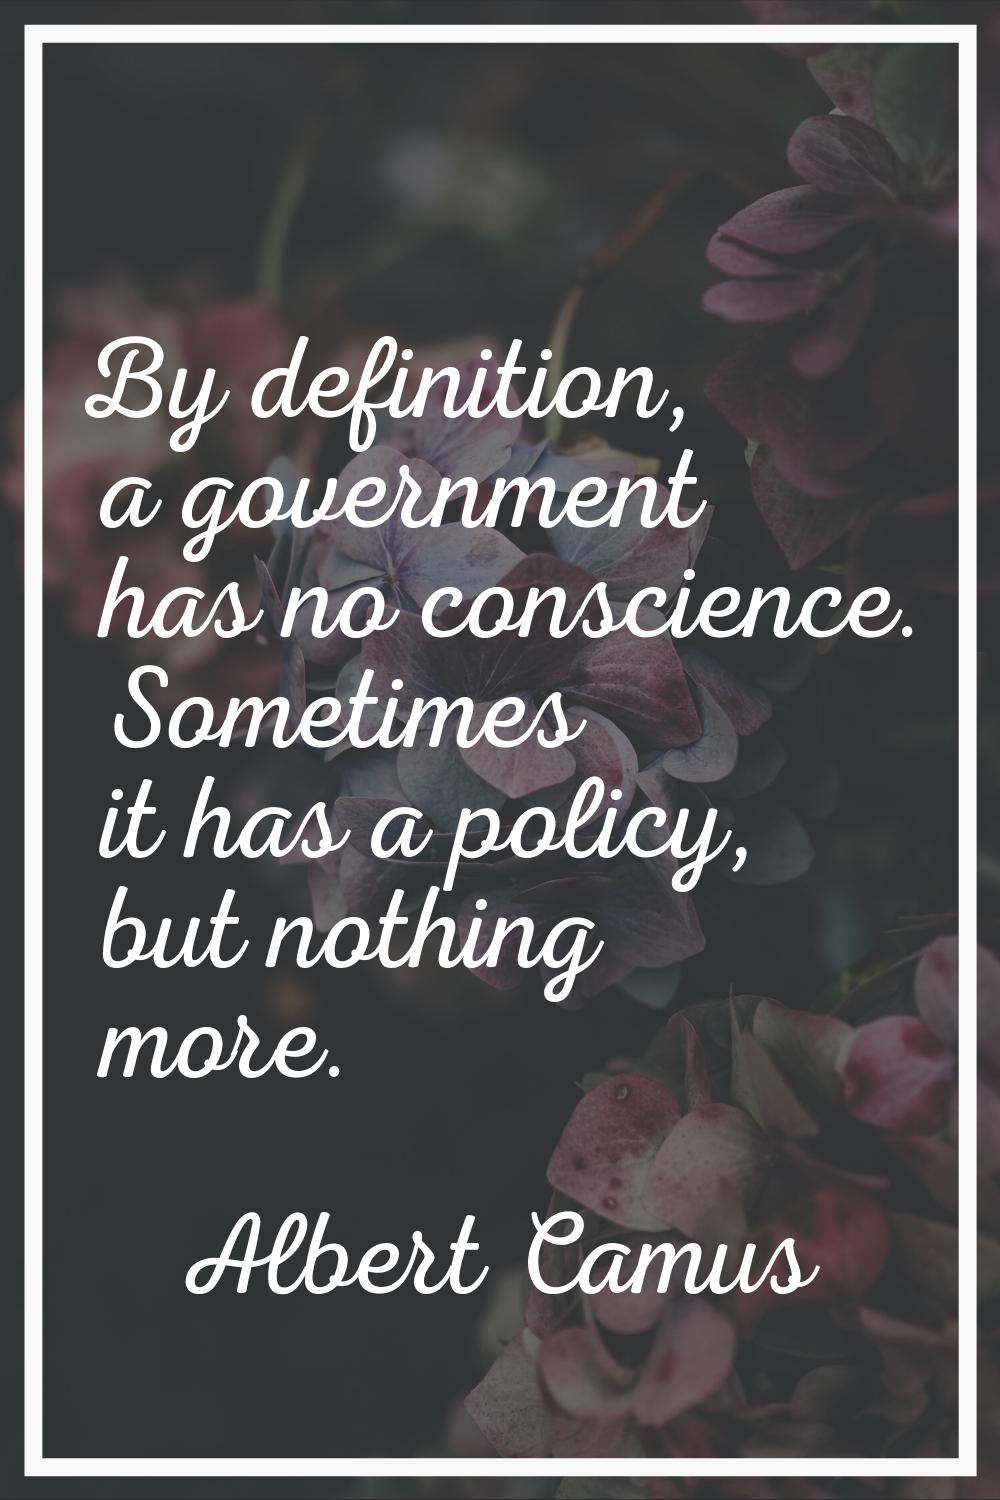 By definition, a government has no conscience. Sometimes it has a policy, but nothing more.